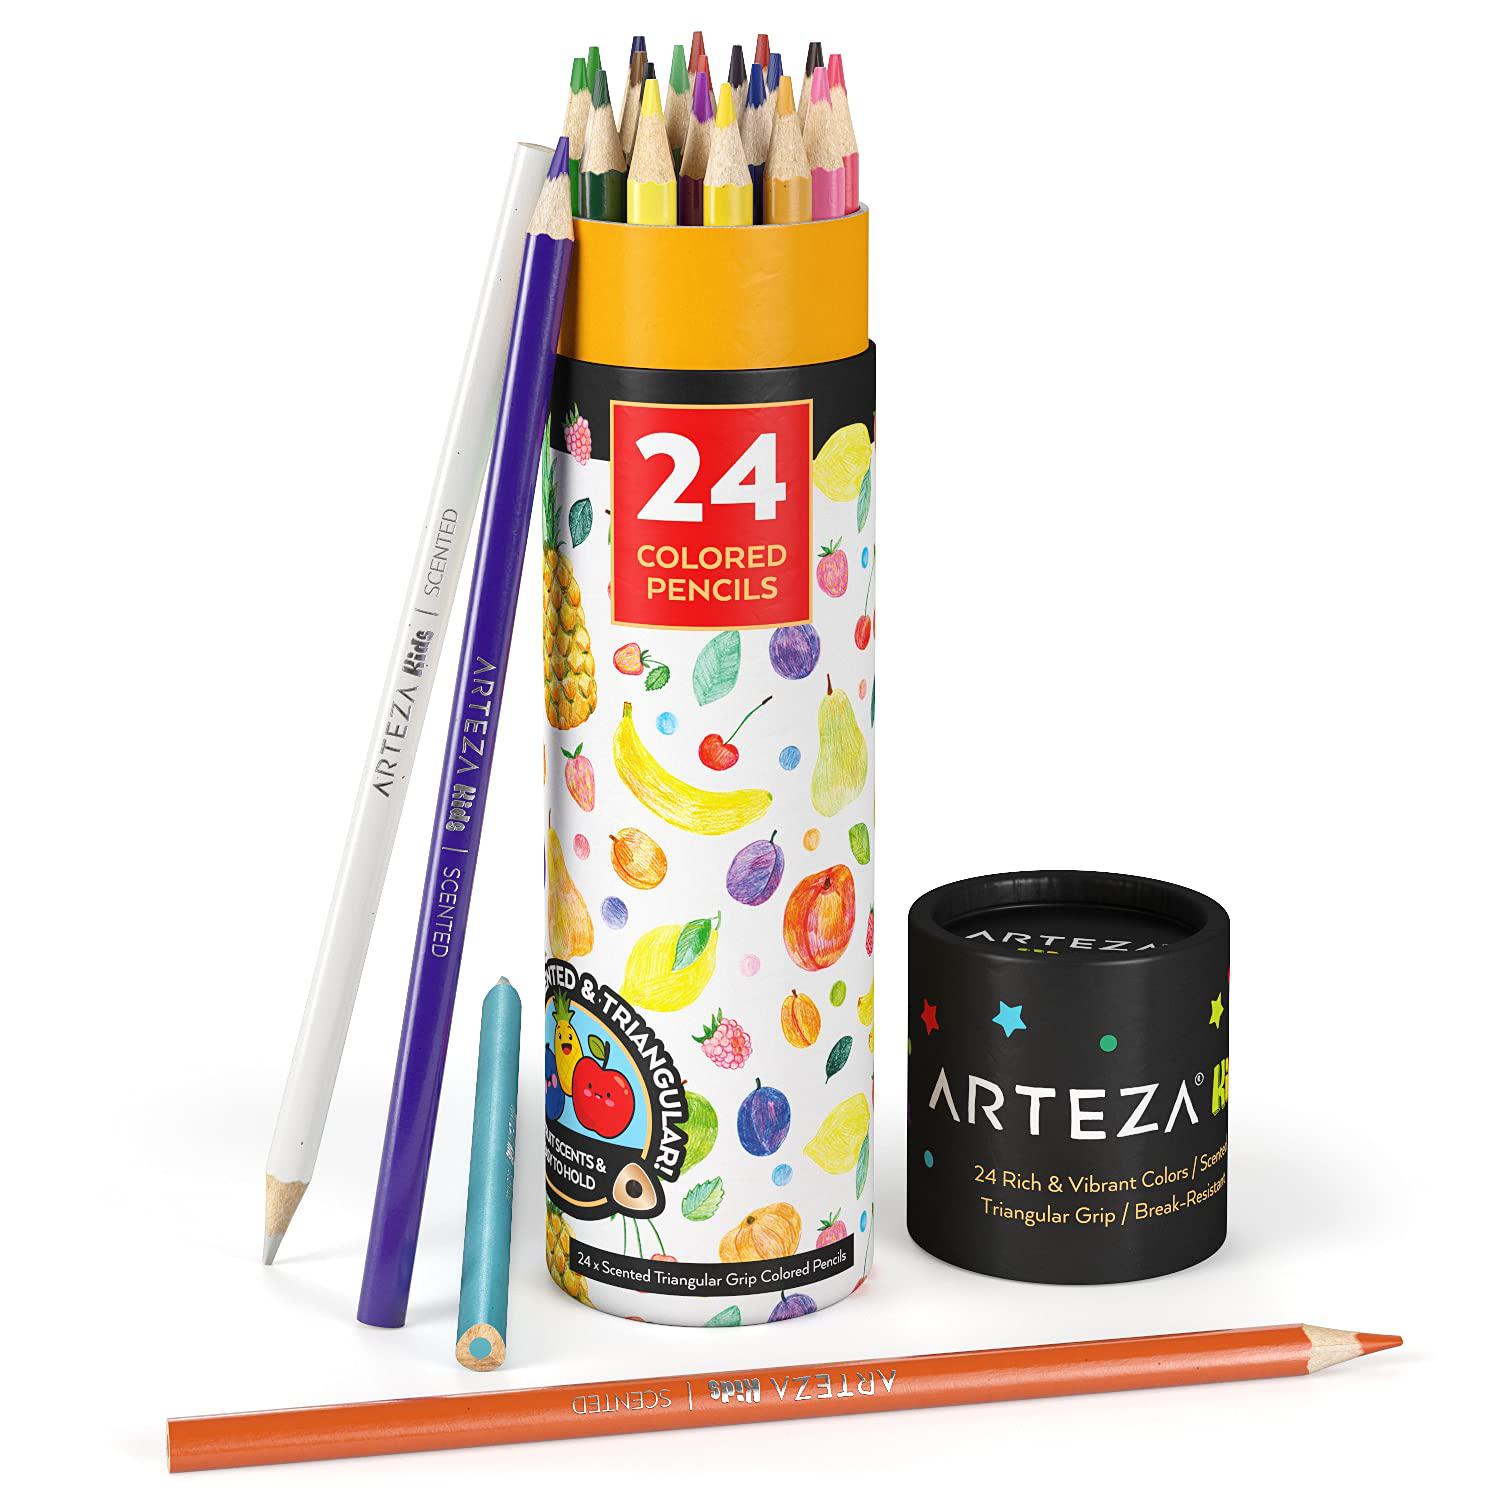 arteza kids scented colored pencils, set of 24 easy-to-grip pencil crayons, triangular shape, pre-sharpened, art and school s